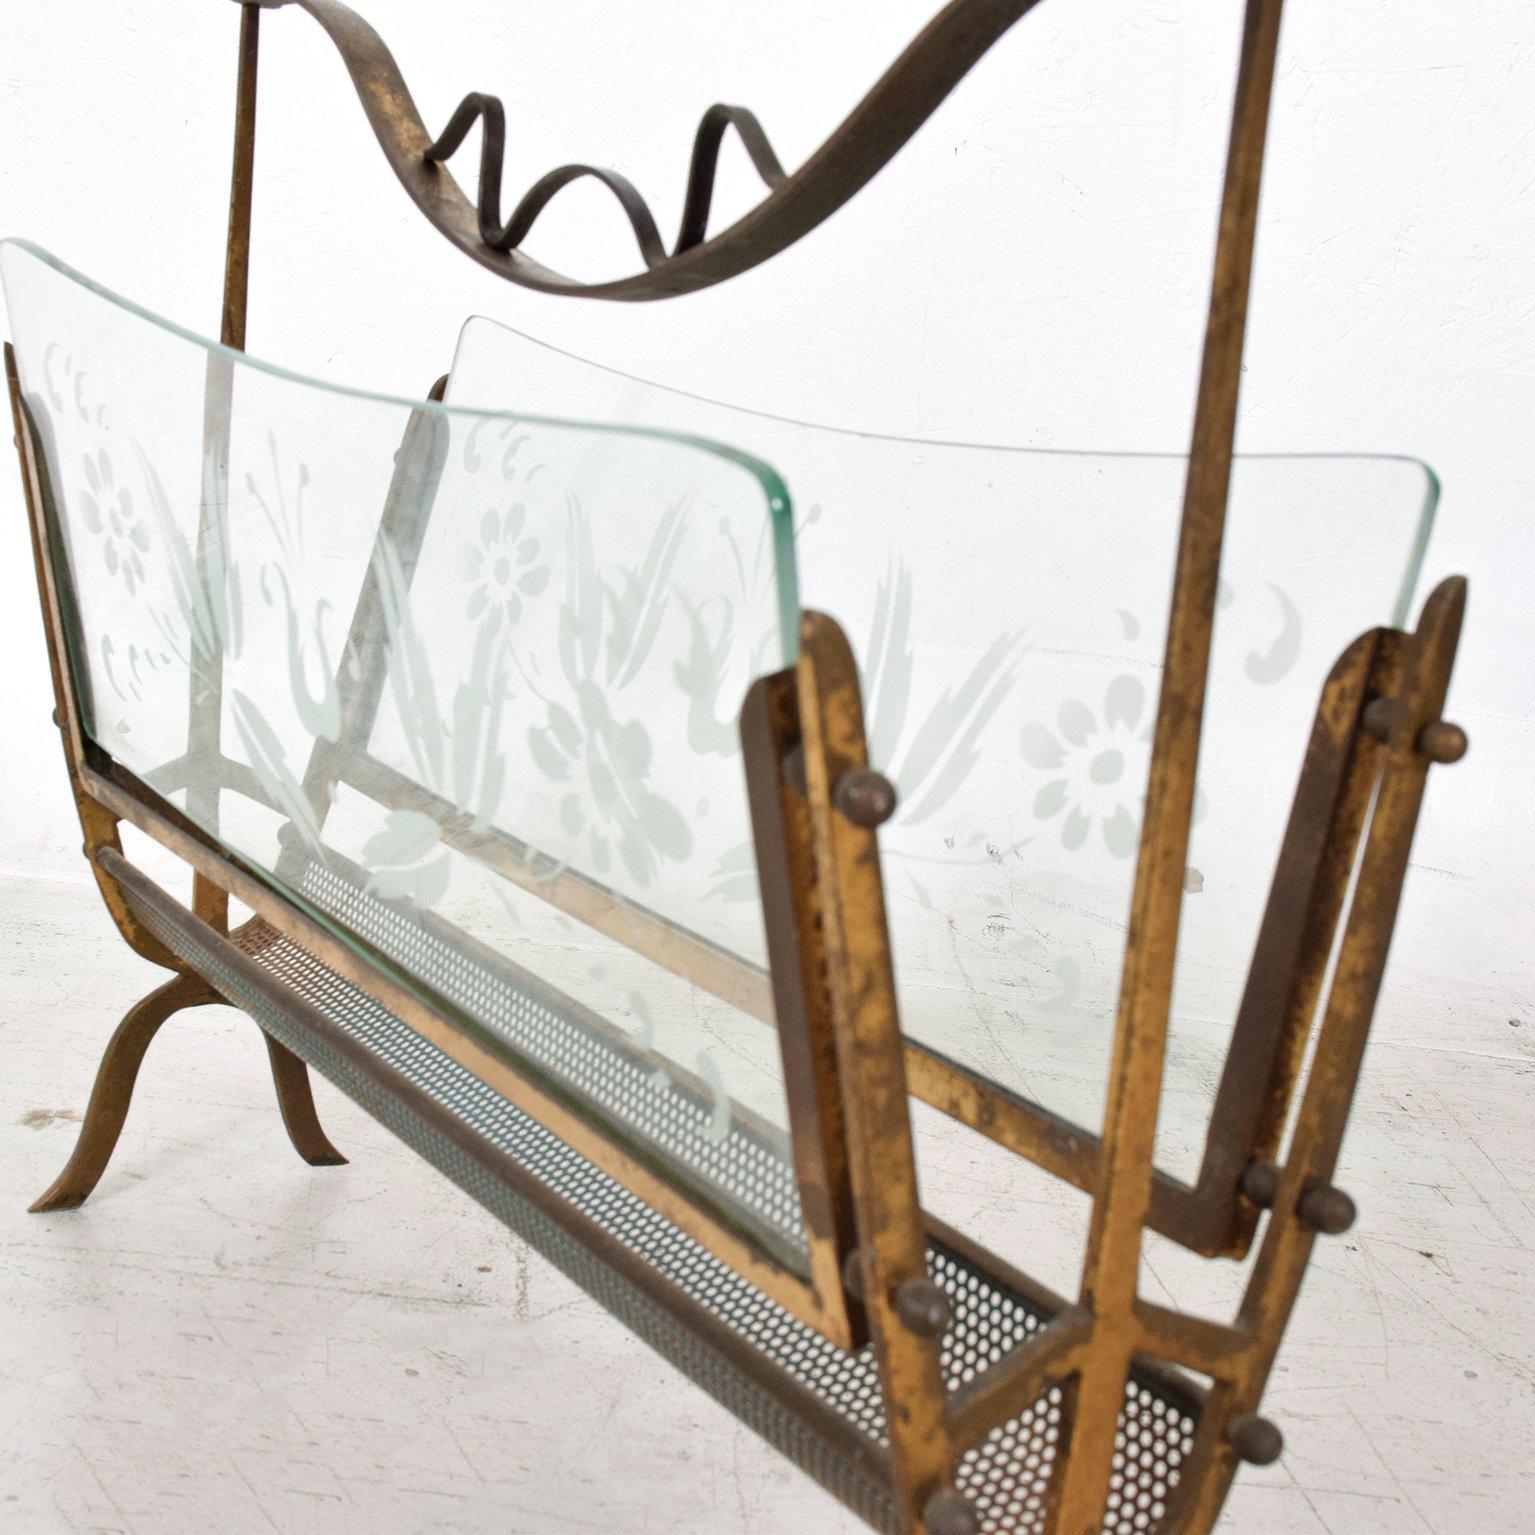 For your consideration a vintage Italian magazine holder or magazine rack constructed with solid brass and two glass inserts with flower etched design. 

The lower holding section is perforated metal (painted in dark green color).

Original